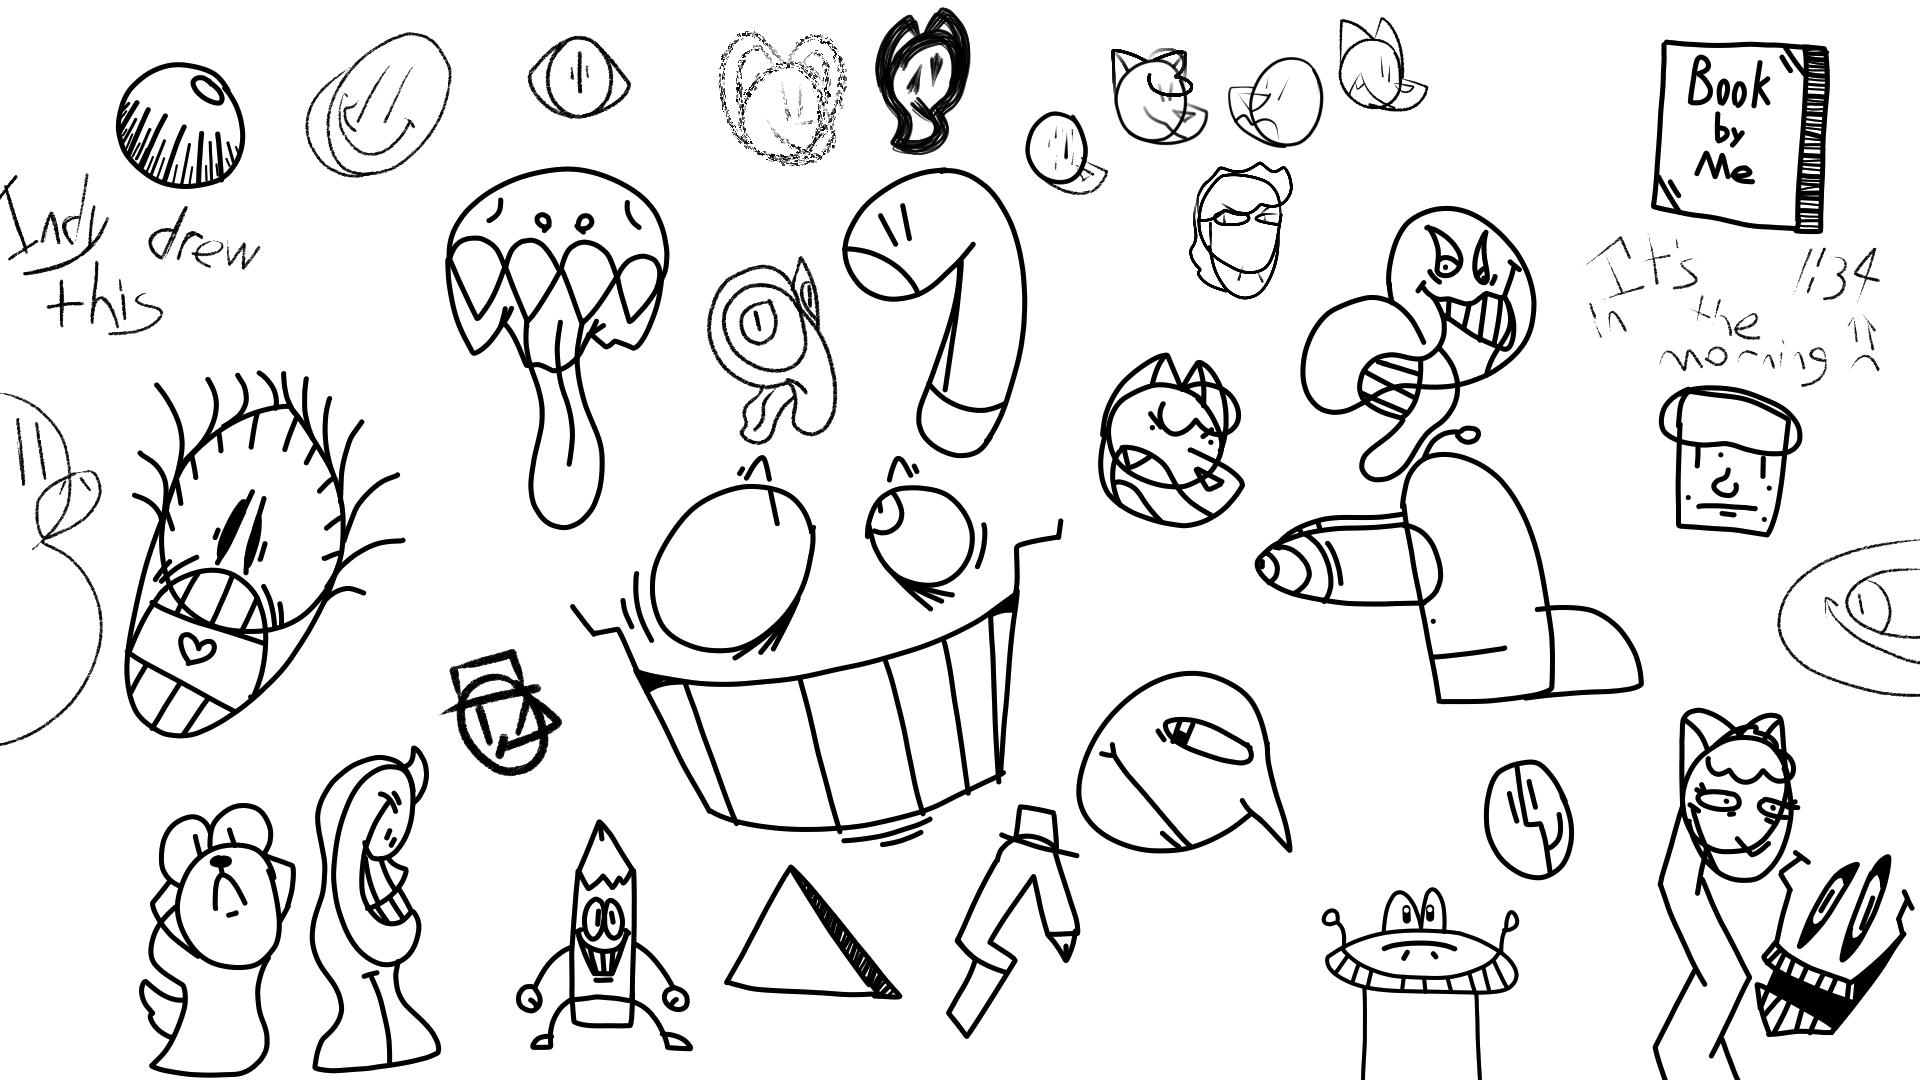 A wide array of sketches, most of which are facial expressions.